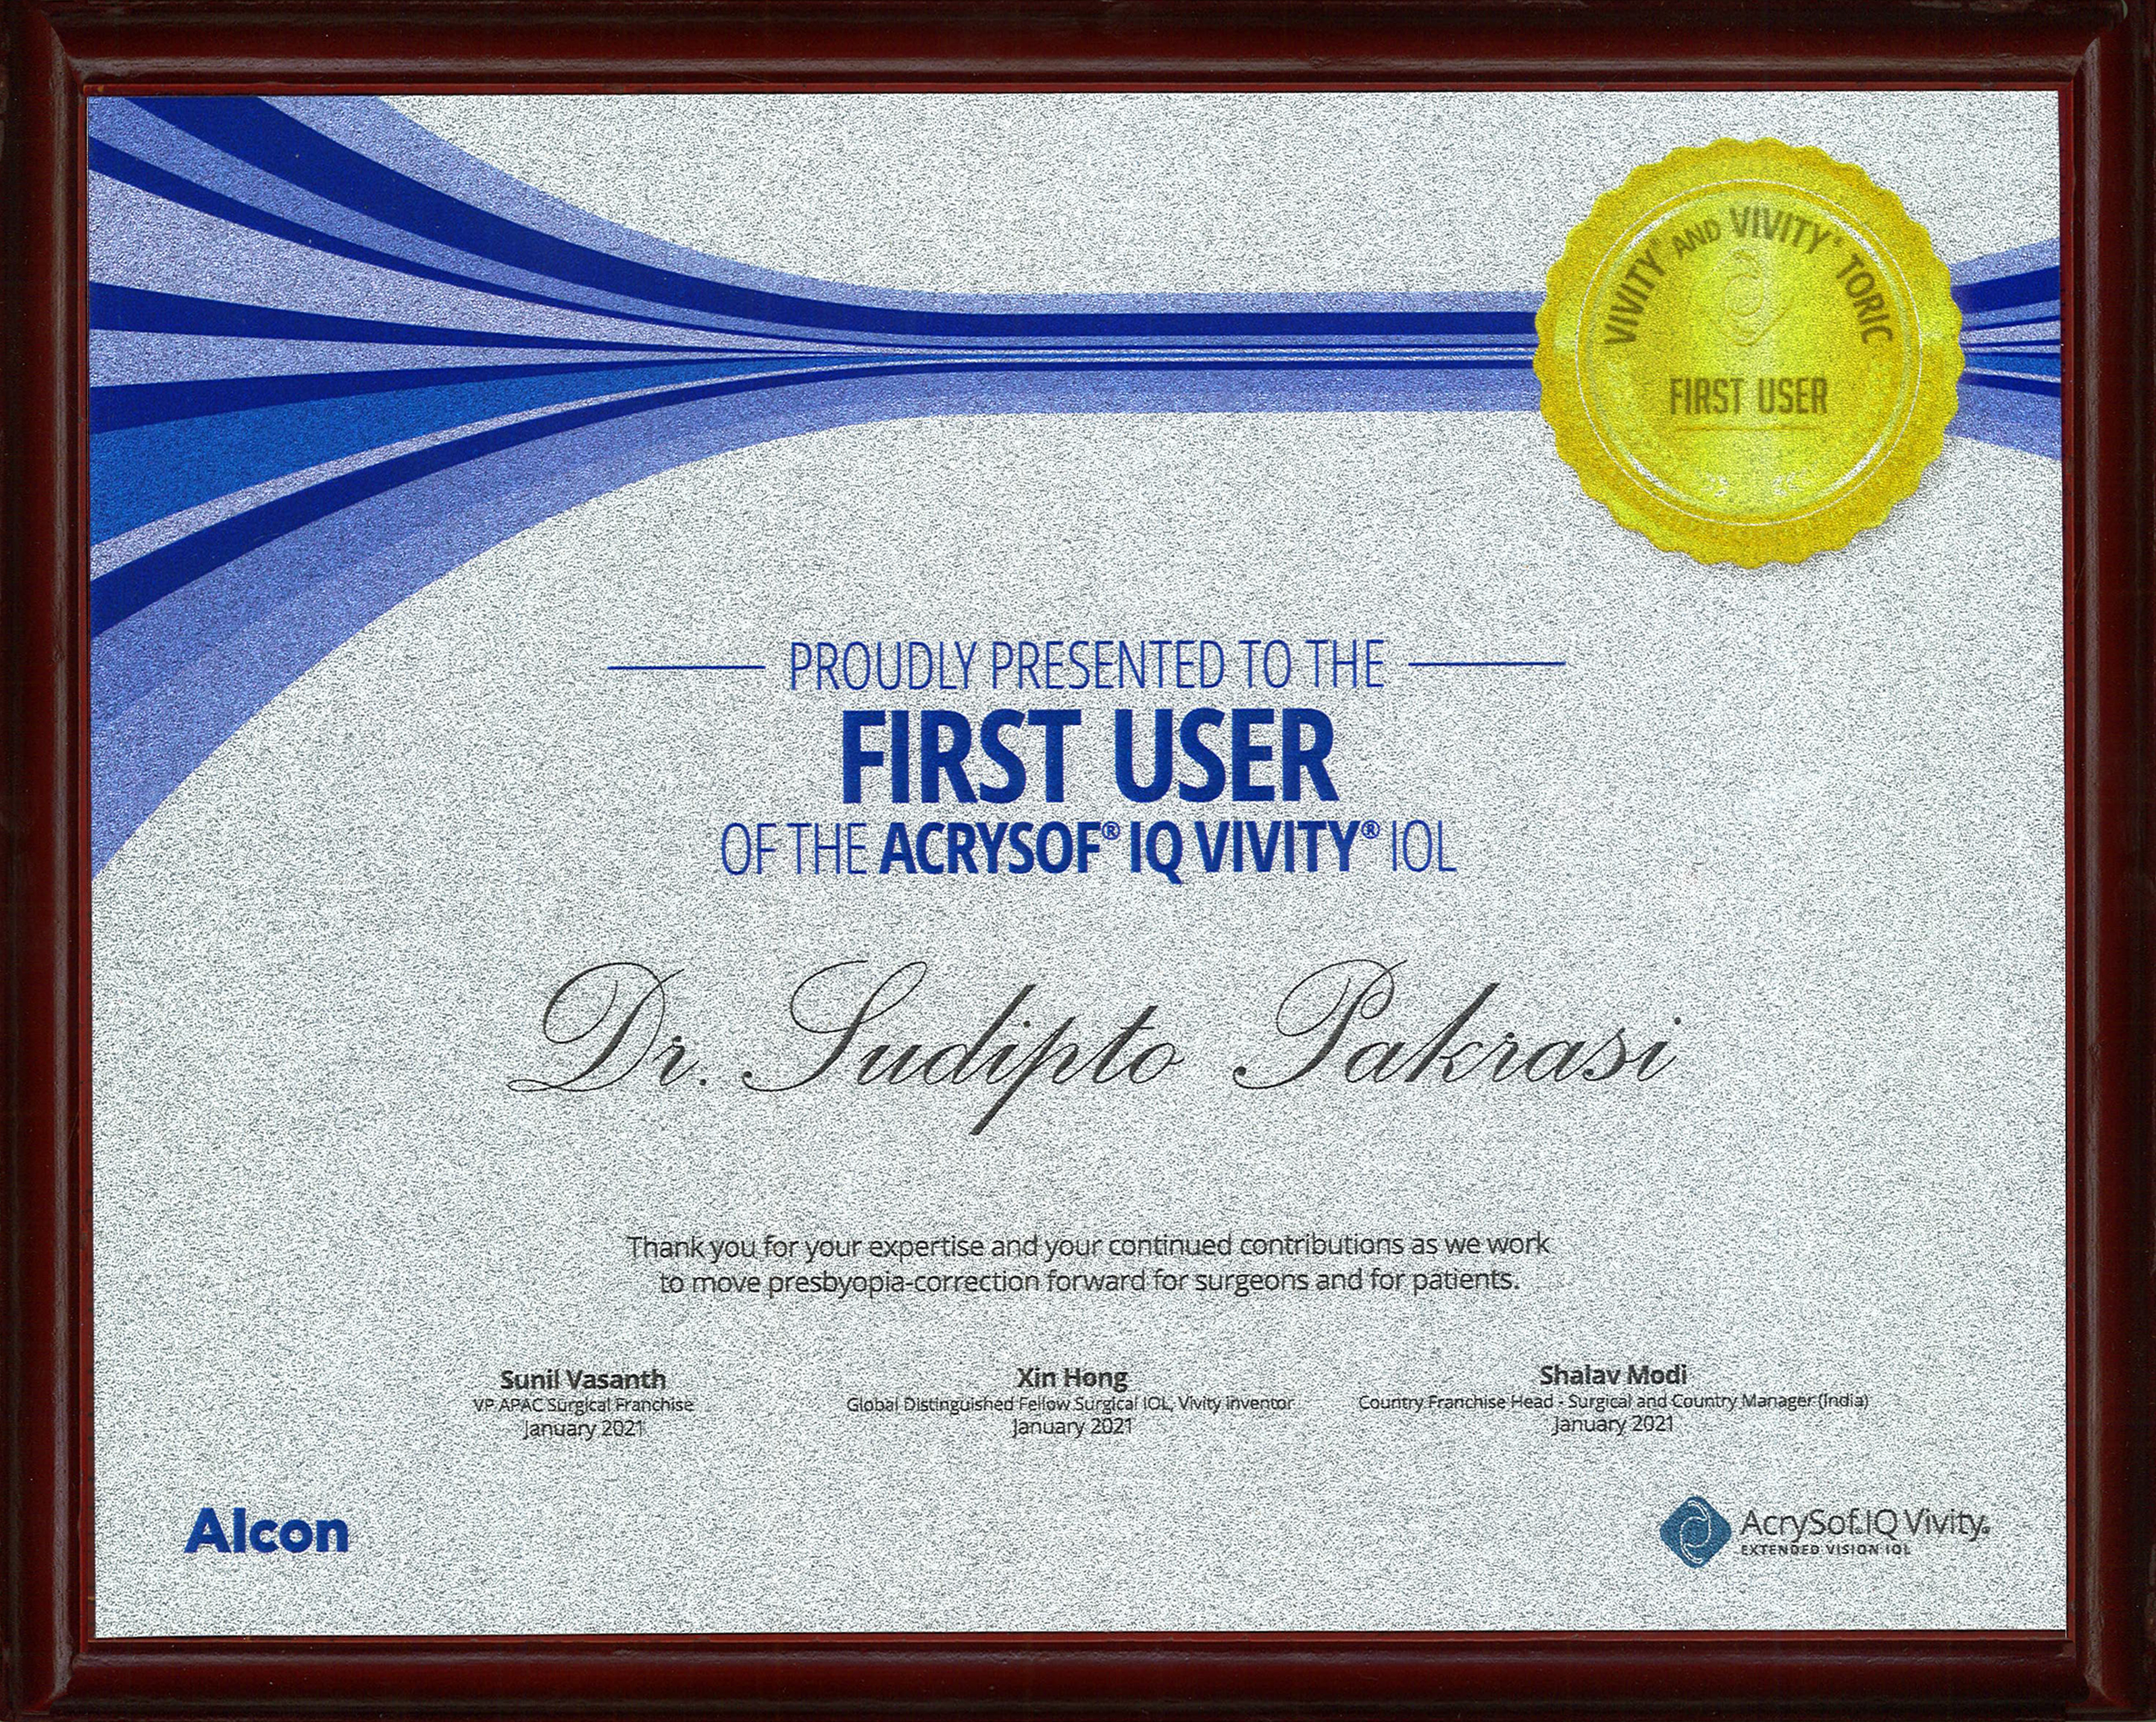 proudly-present-to-the-first-user-of-the-acrysof-iq-vivity-iol-dr-sudipto-pakrasi